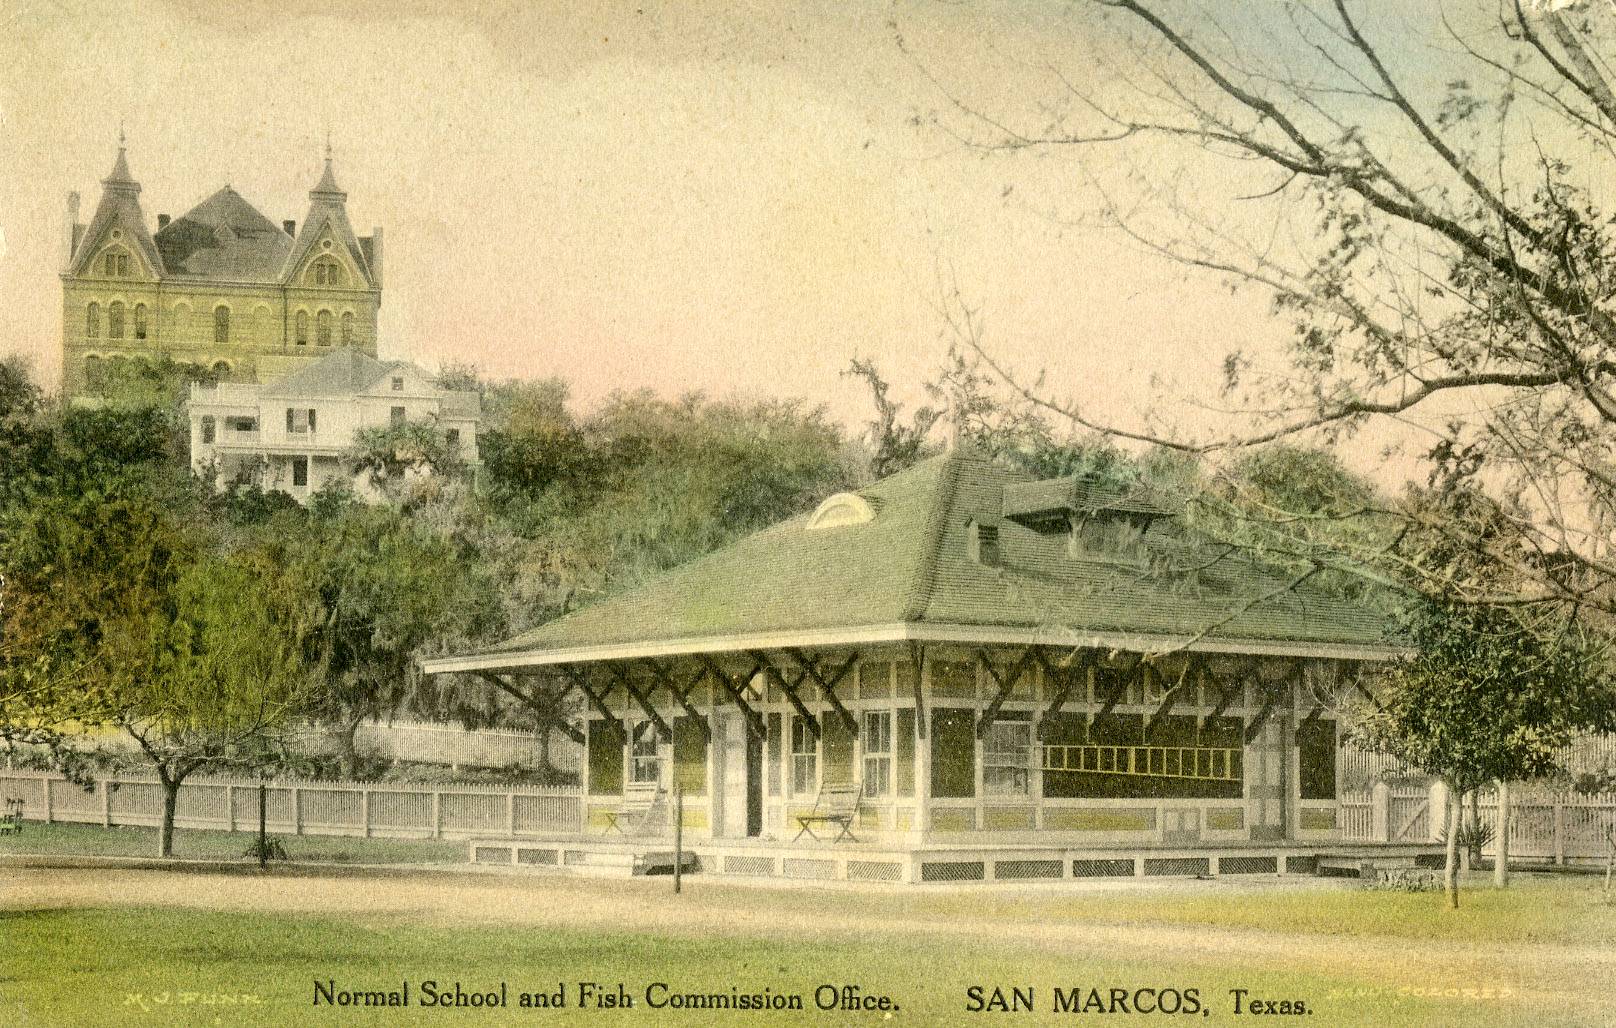 postcard image of a photograph of the Texas State Normal School and fish commissions office in San Marcos, Texas